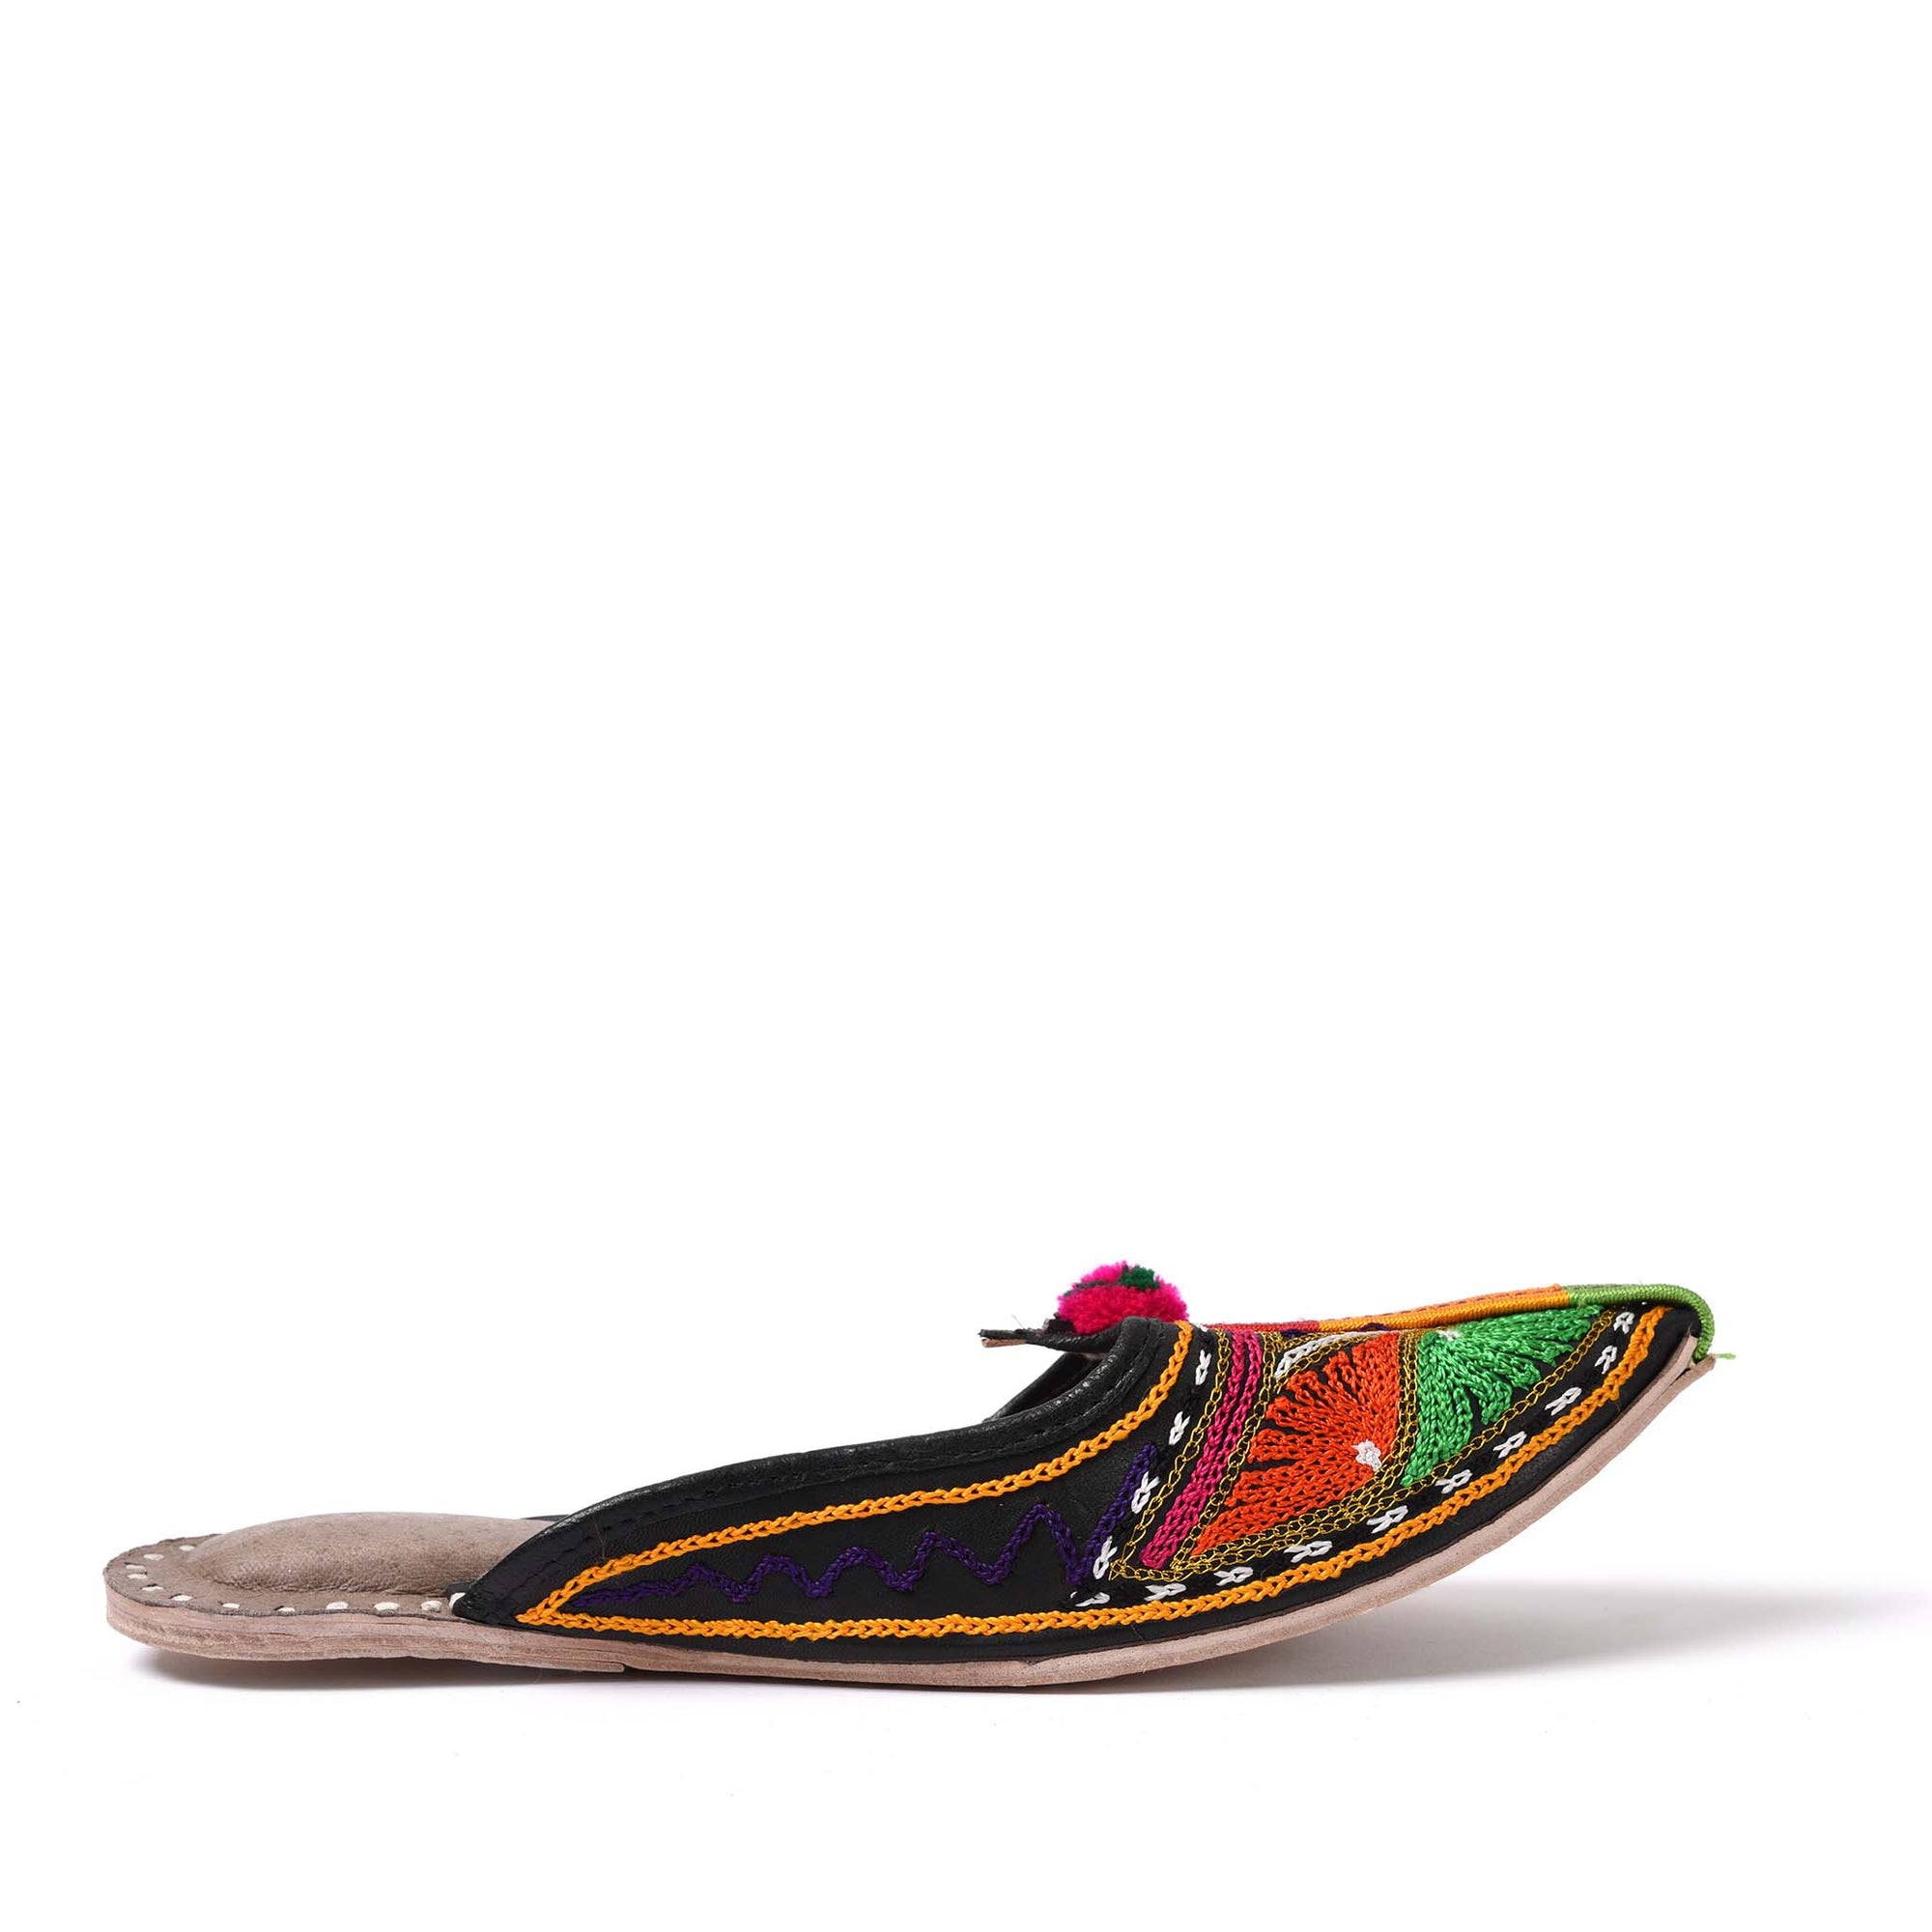 Handmade Indian Jutti Slippers. Colourful Embroidered Leather | Indigo Antiques